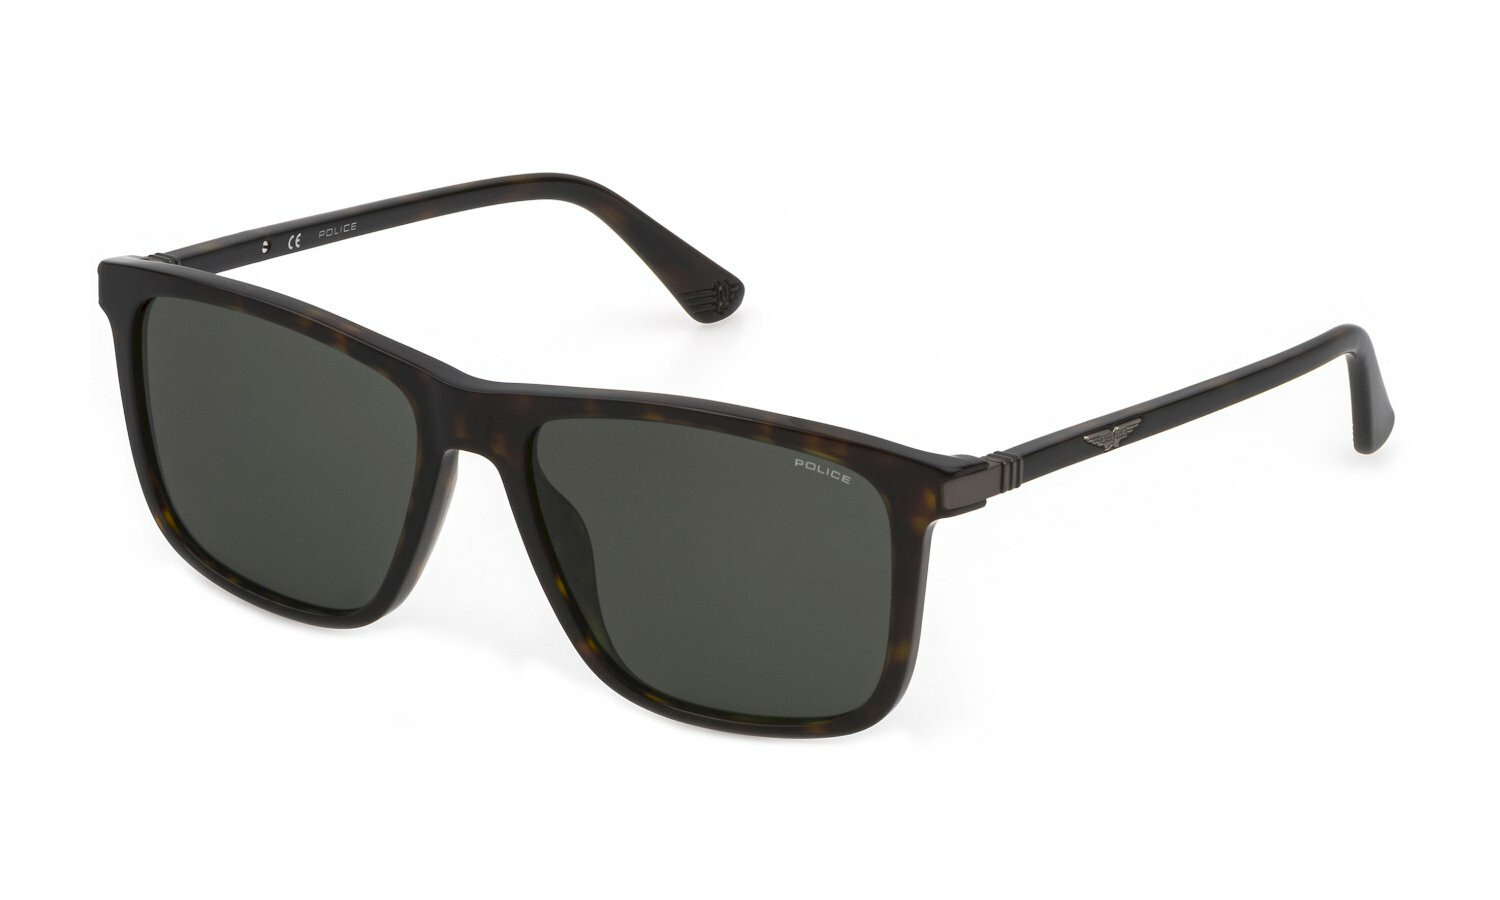 [products.image.front] Police ORIGINS 47 SPLE05 722 Sonnenbrille